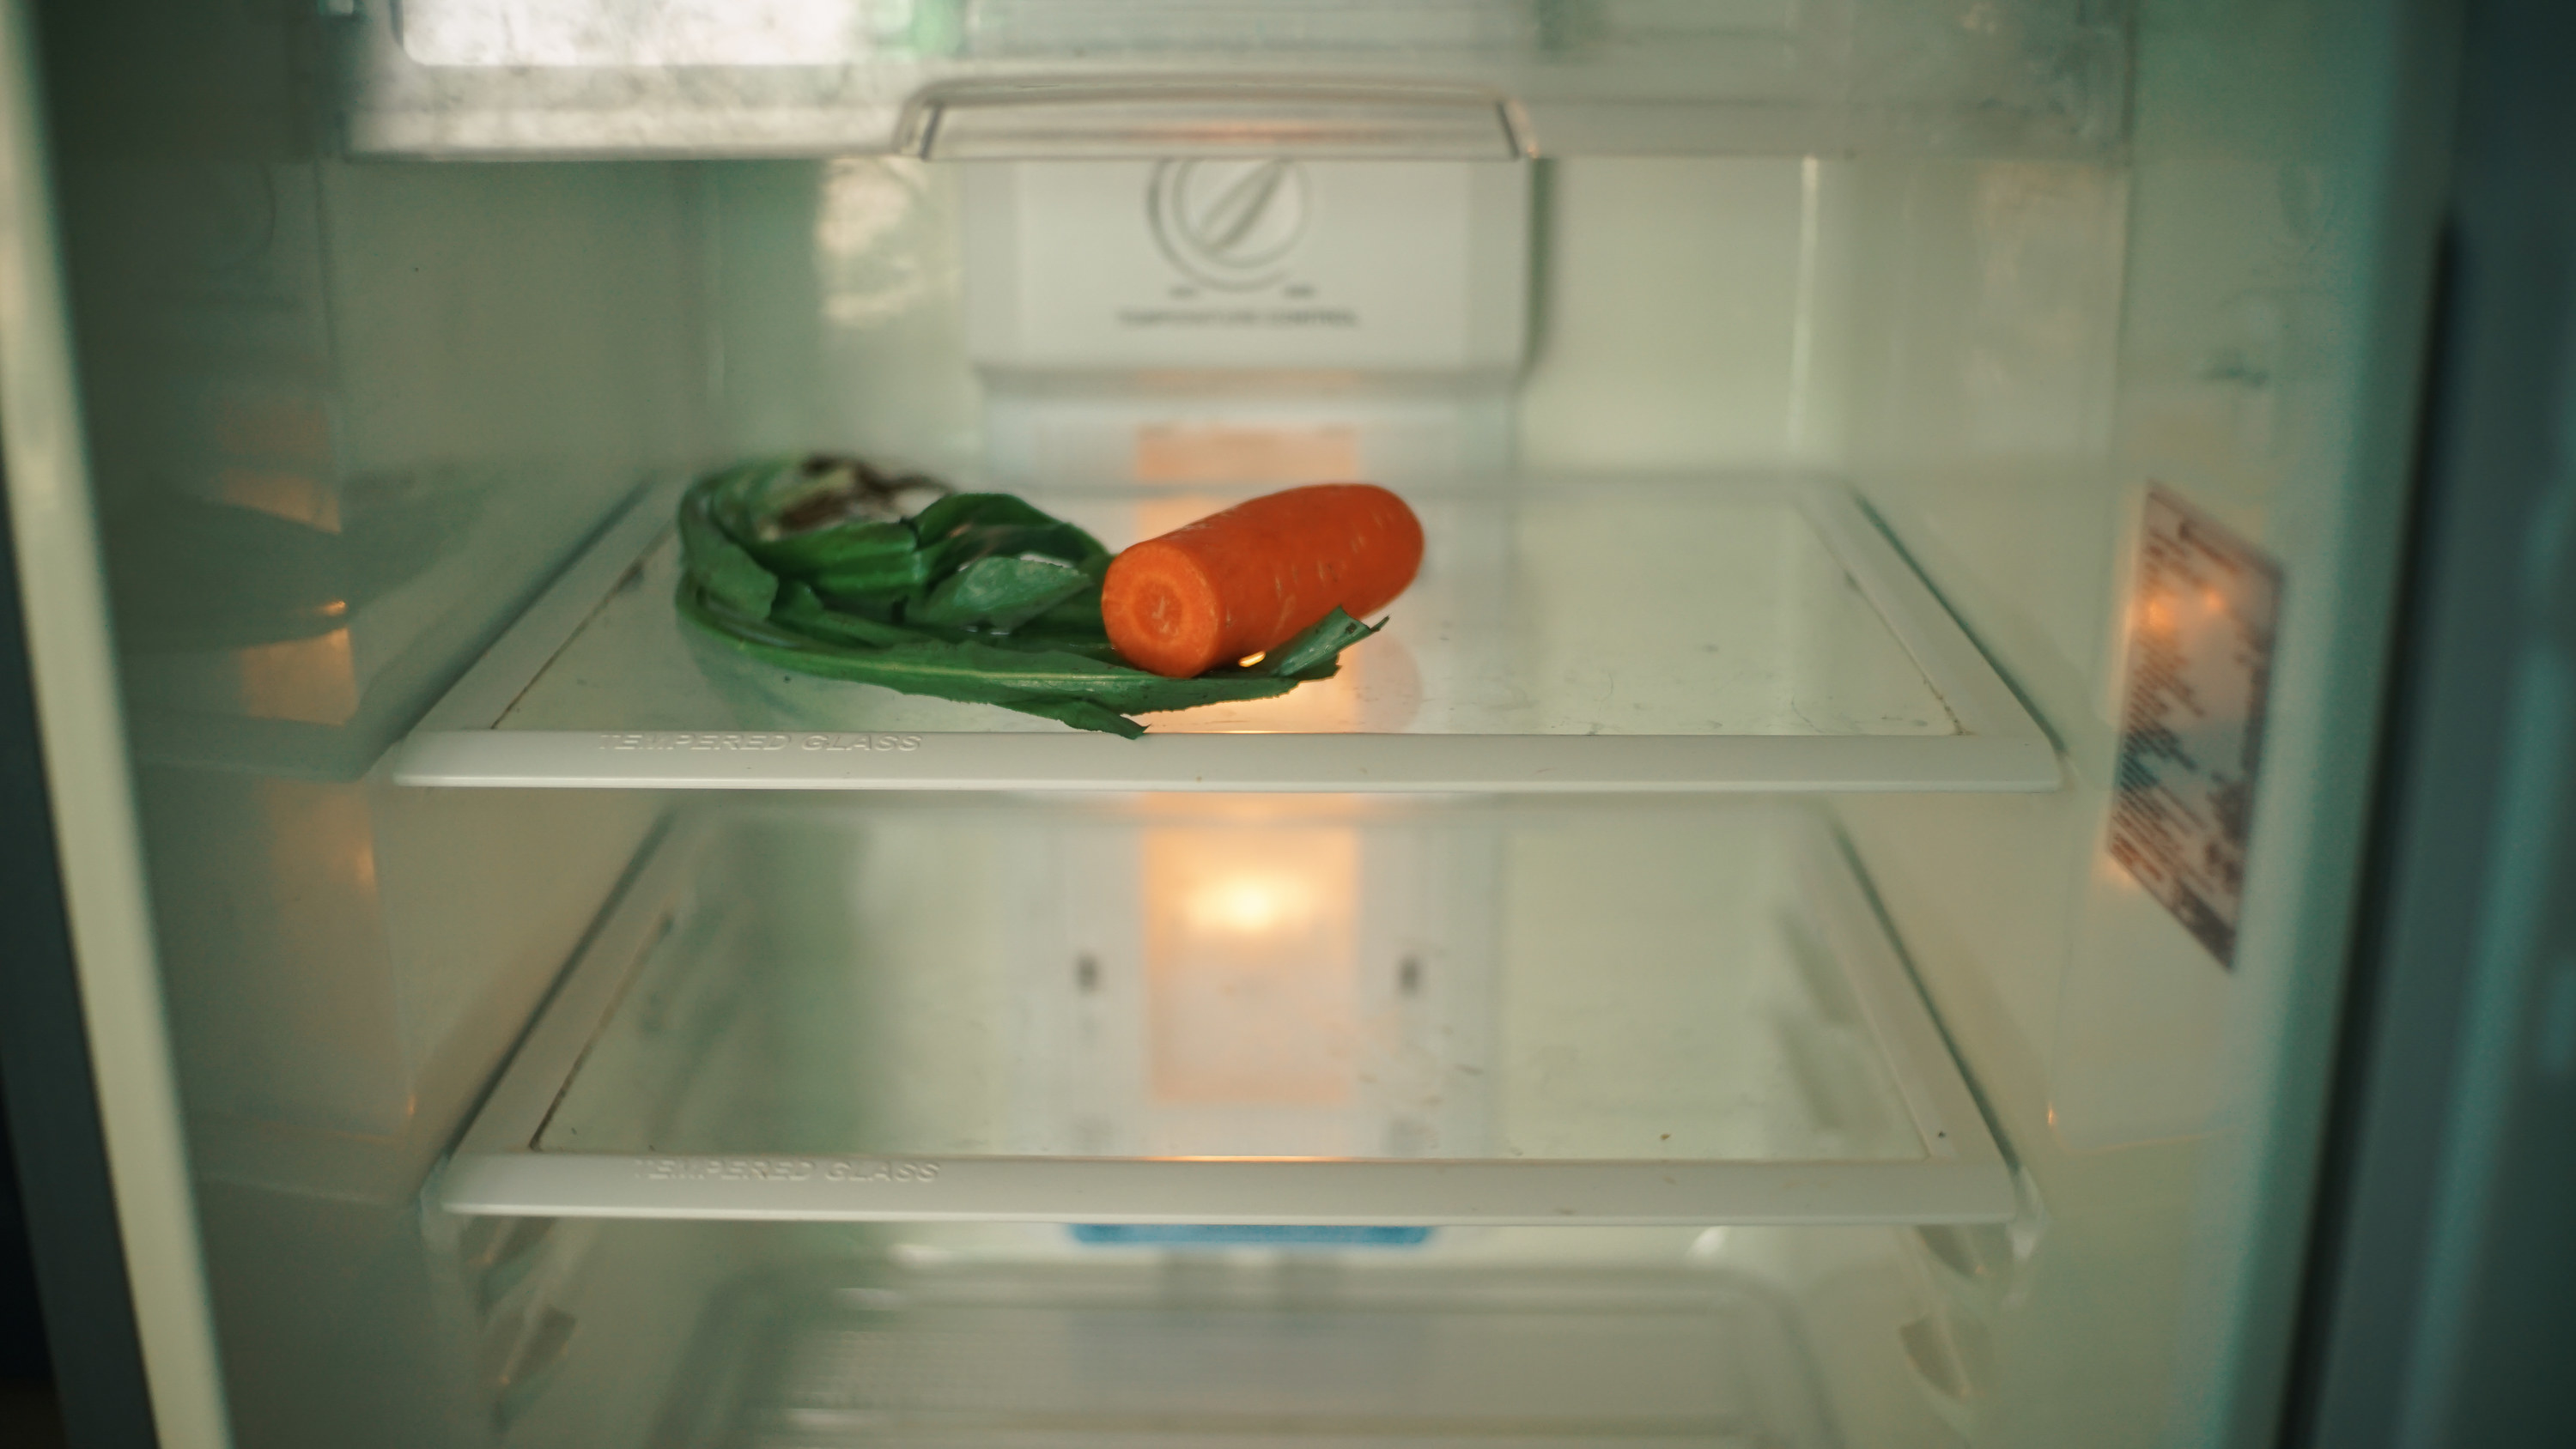 Refrigerator with only a few vegetables left on one shelf